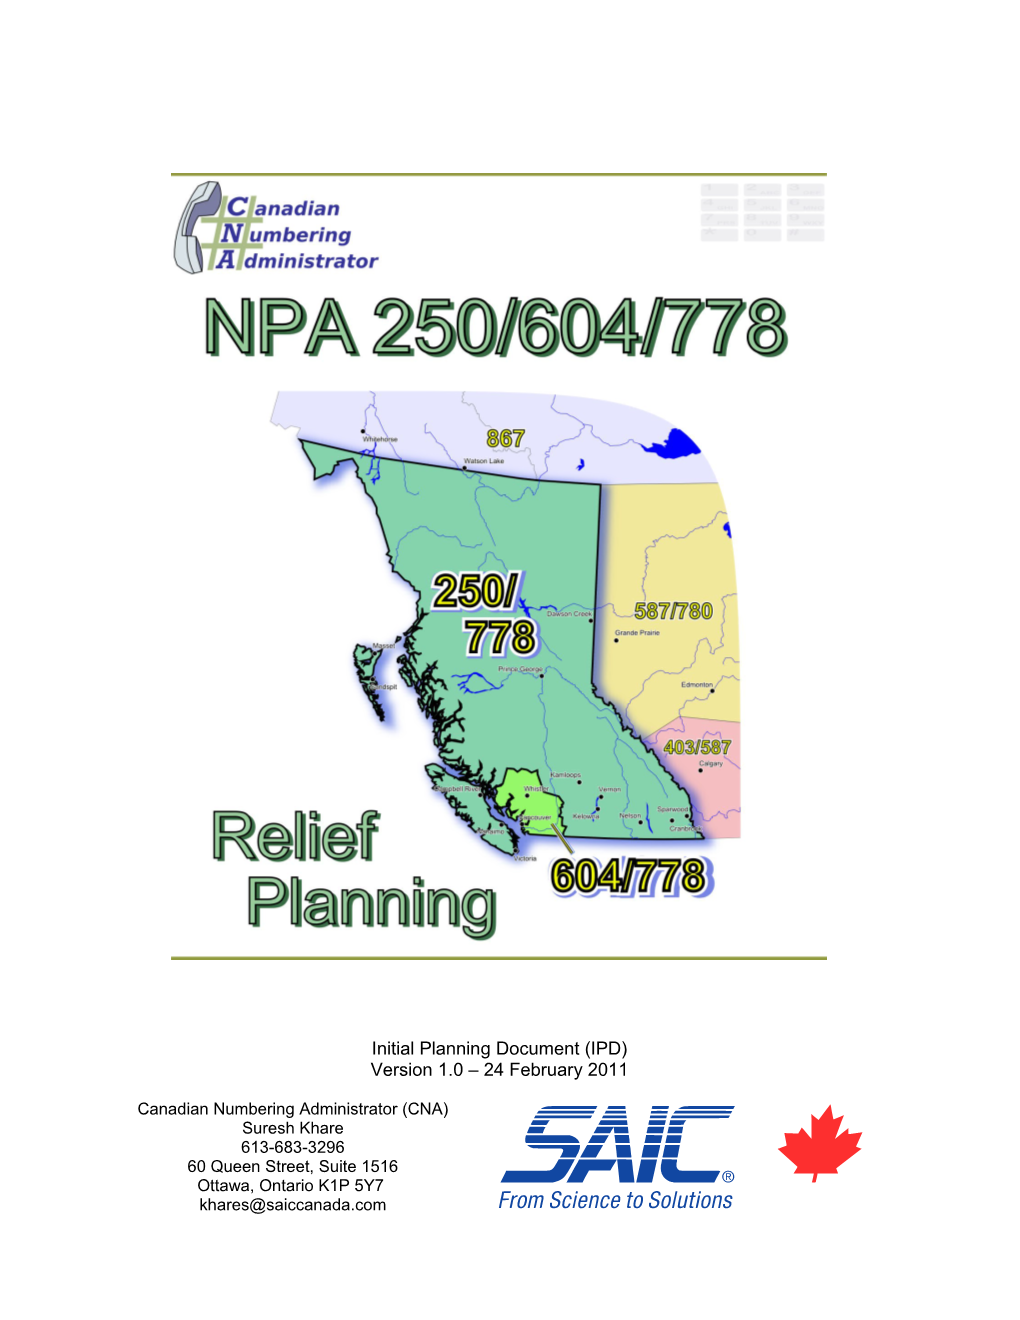 RPC Planning Document NPA 250/604/778 Numbering Relief